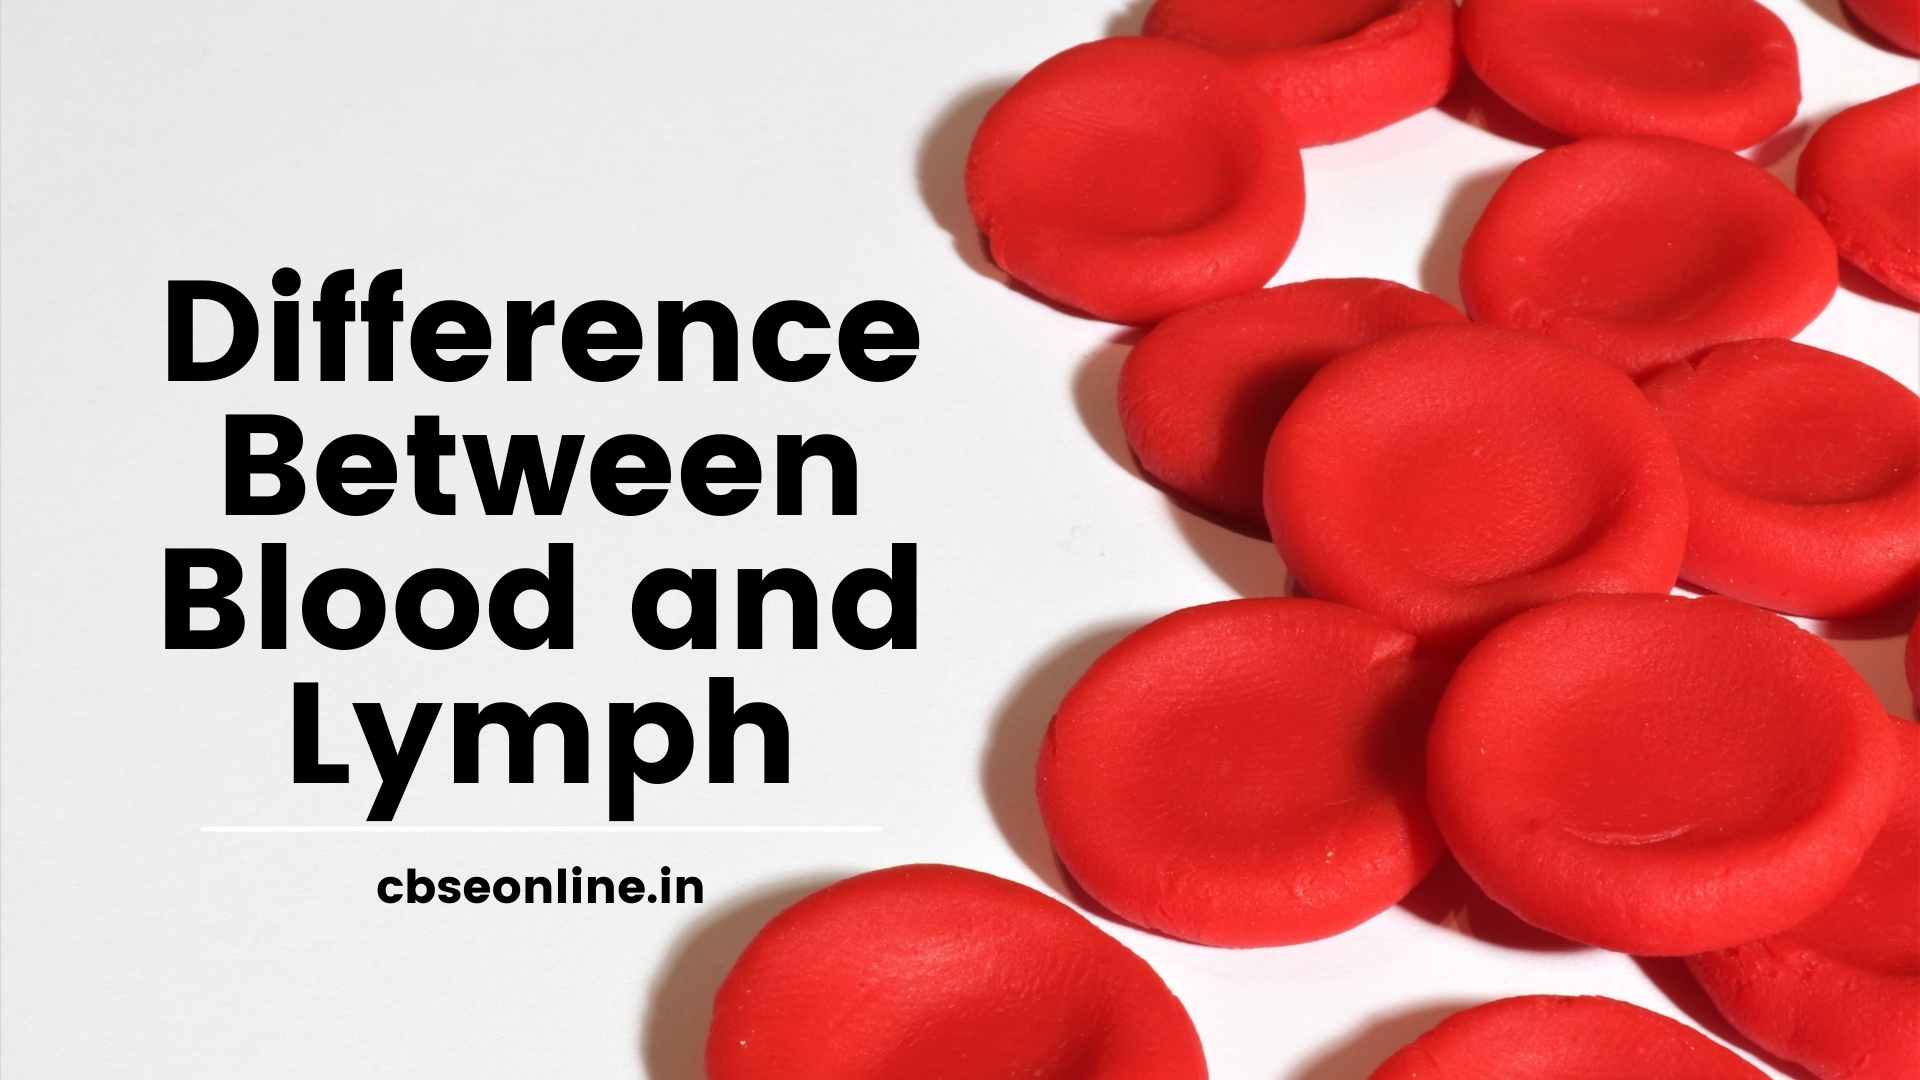 Difference Between Blood and Lymph Class 10 Science